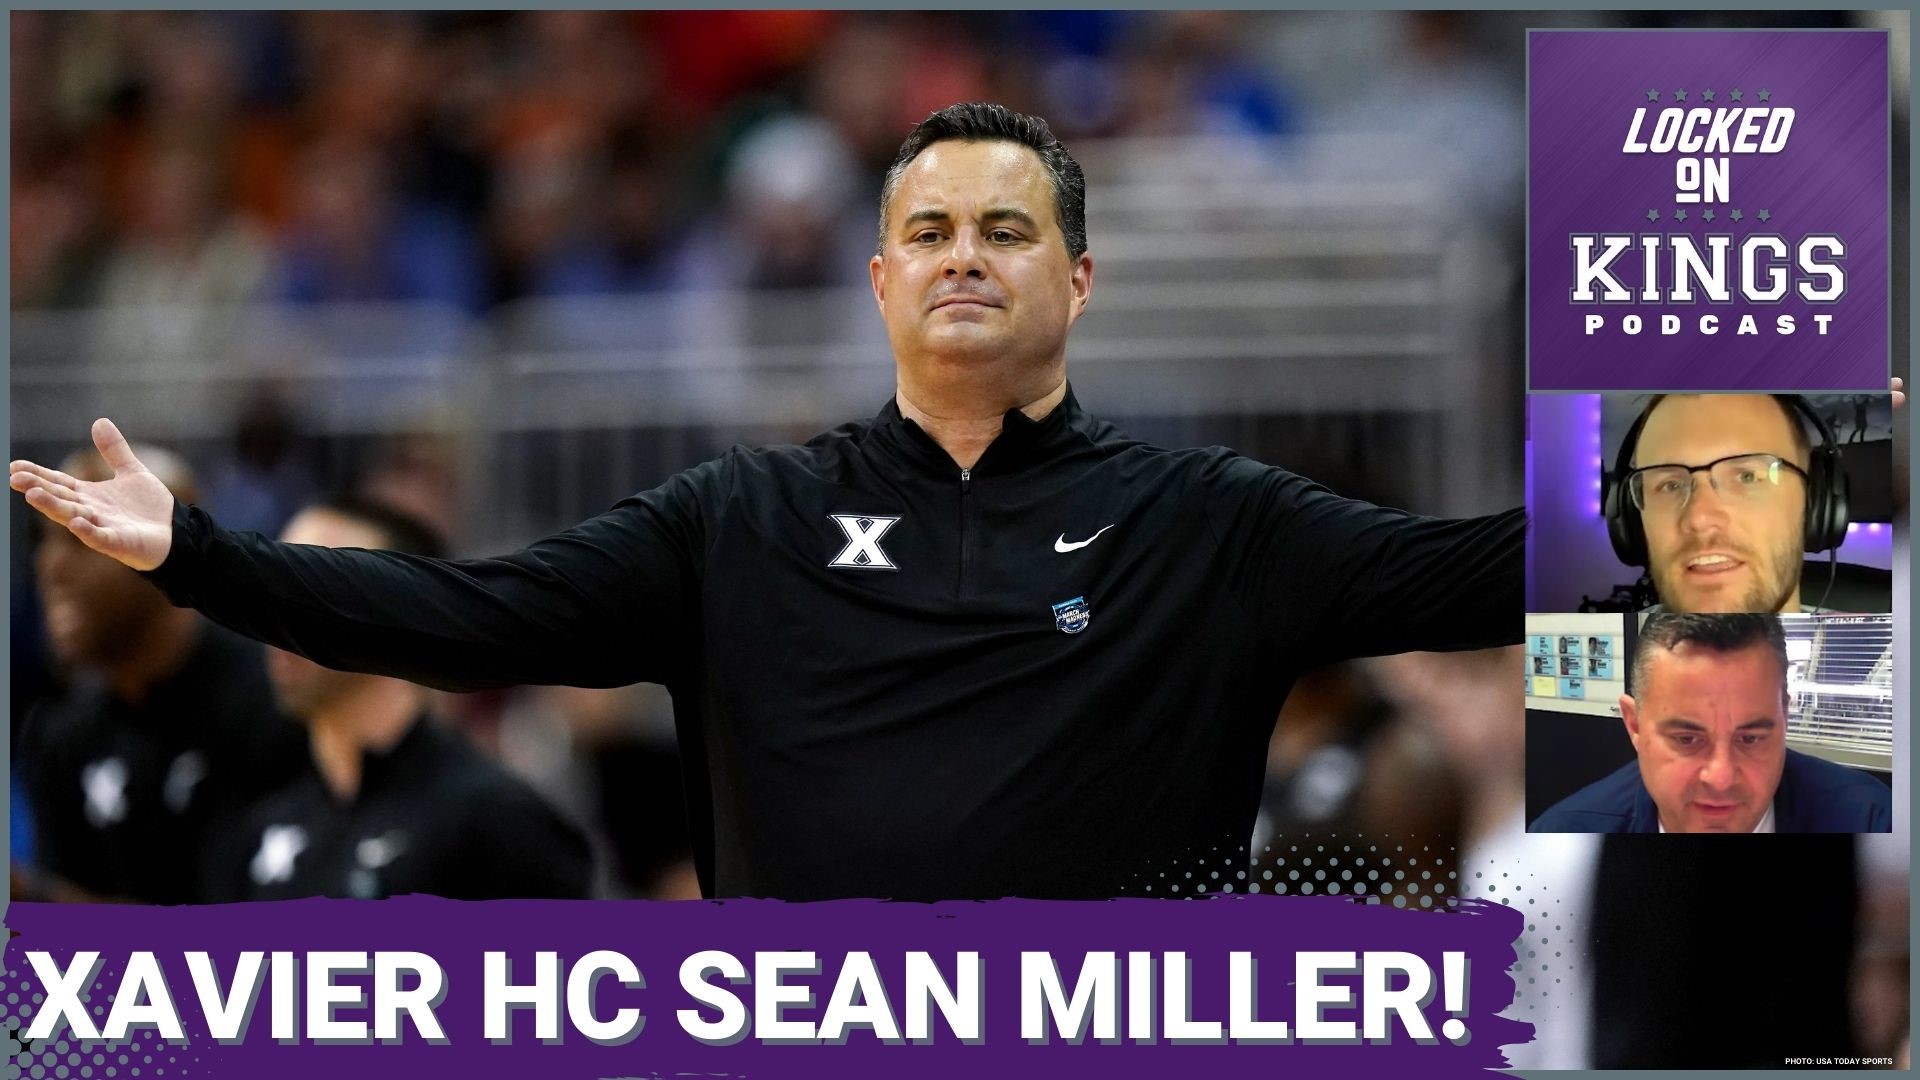 Matt George is joined by the head coach of Xavier men's basketball Sean Miller to discuss Sacramento Kings rookie Colby Jones and what he brings to the NBA.